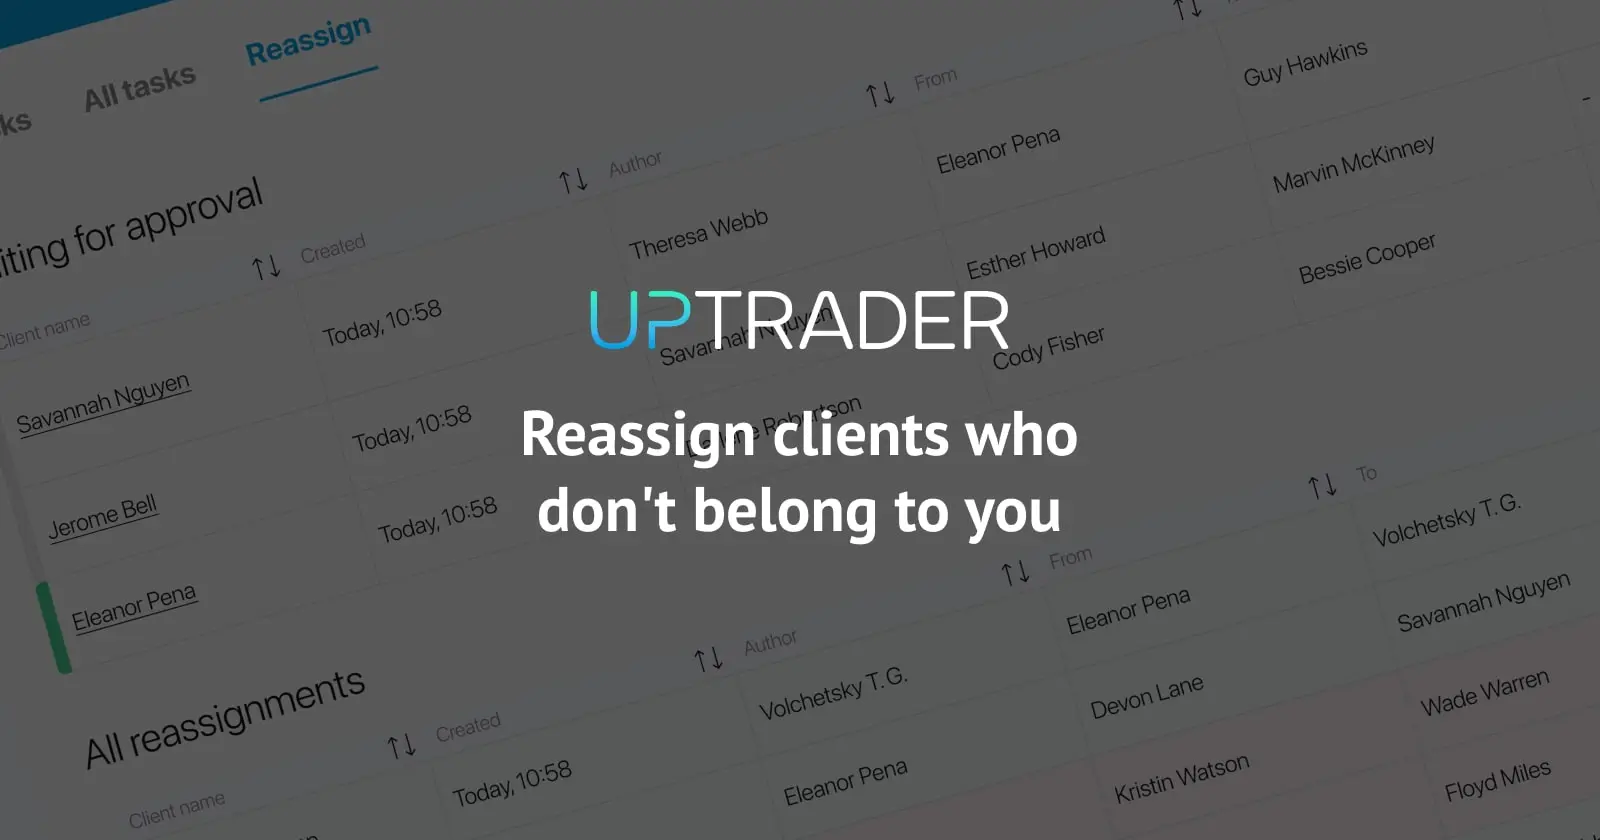 Reassign clients who don't belong to you